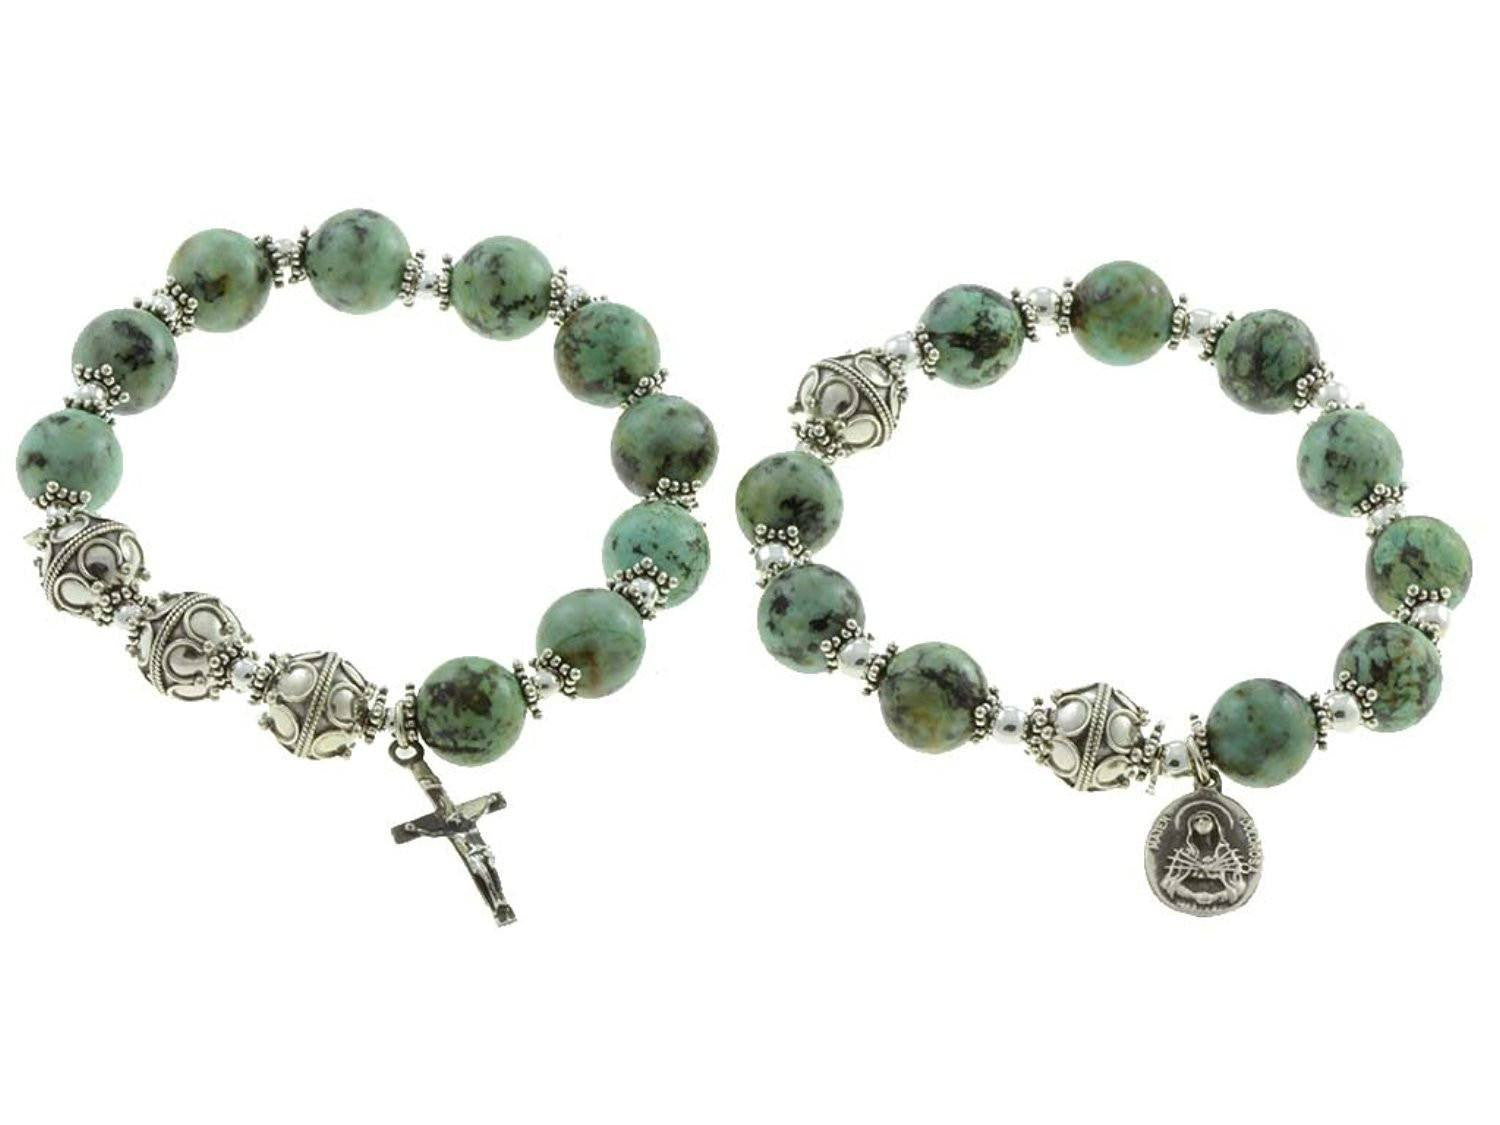 Thick Turquoise and brown rosary wrap bracelet